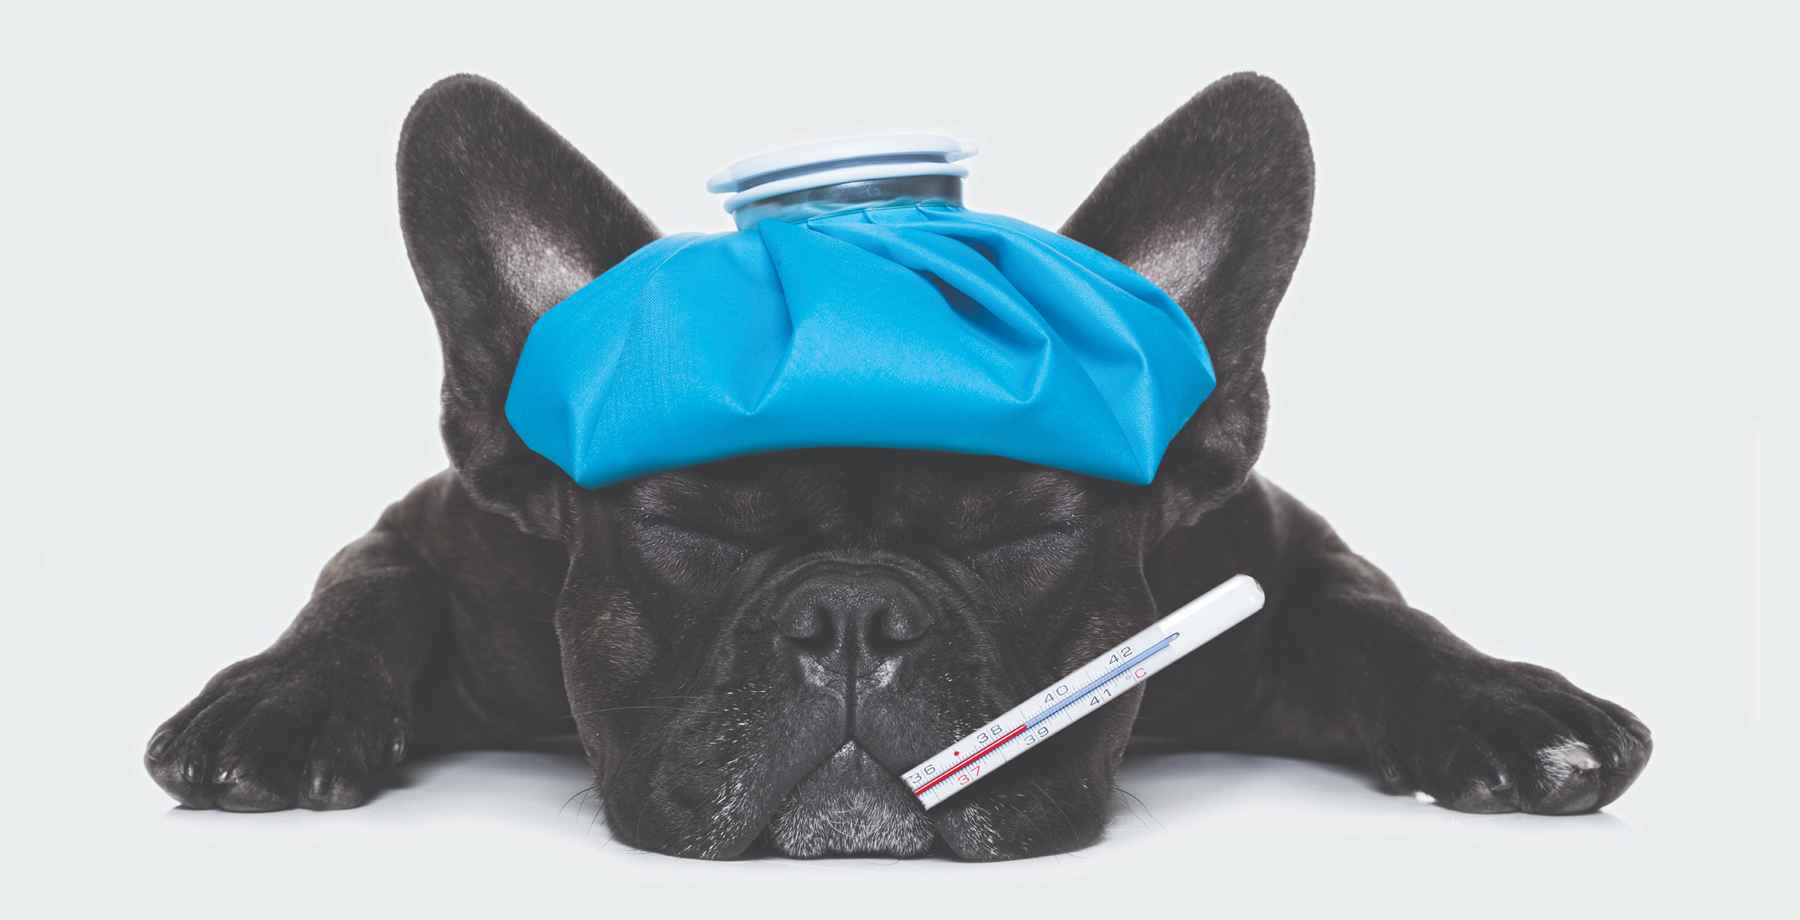 Black dog lying down with a thermometer in its mouth and ice pack on its head.